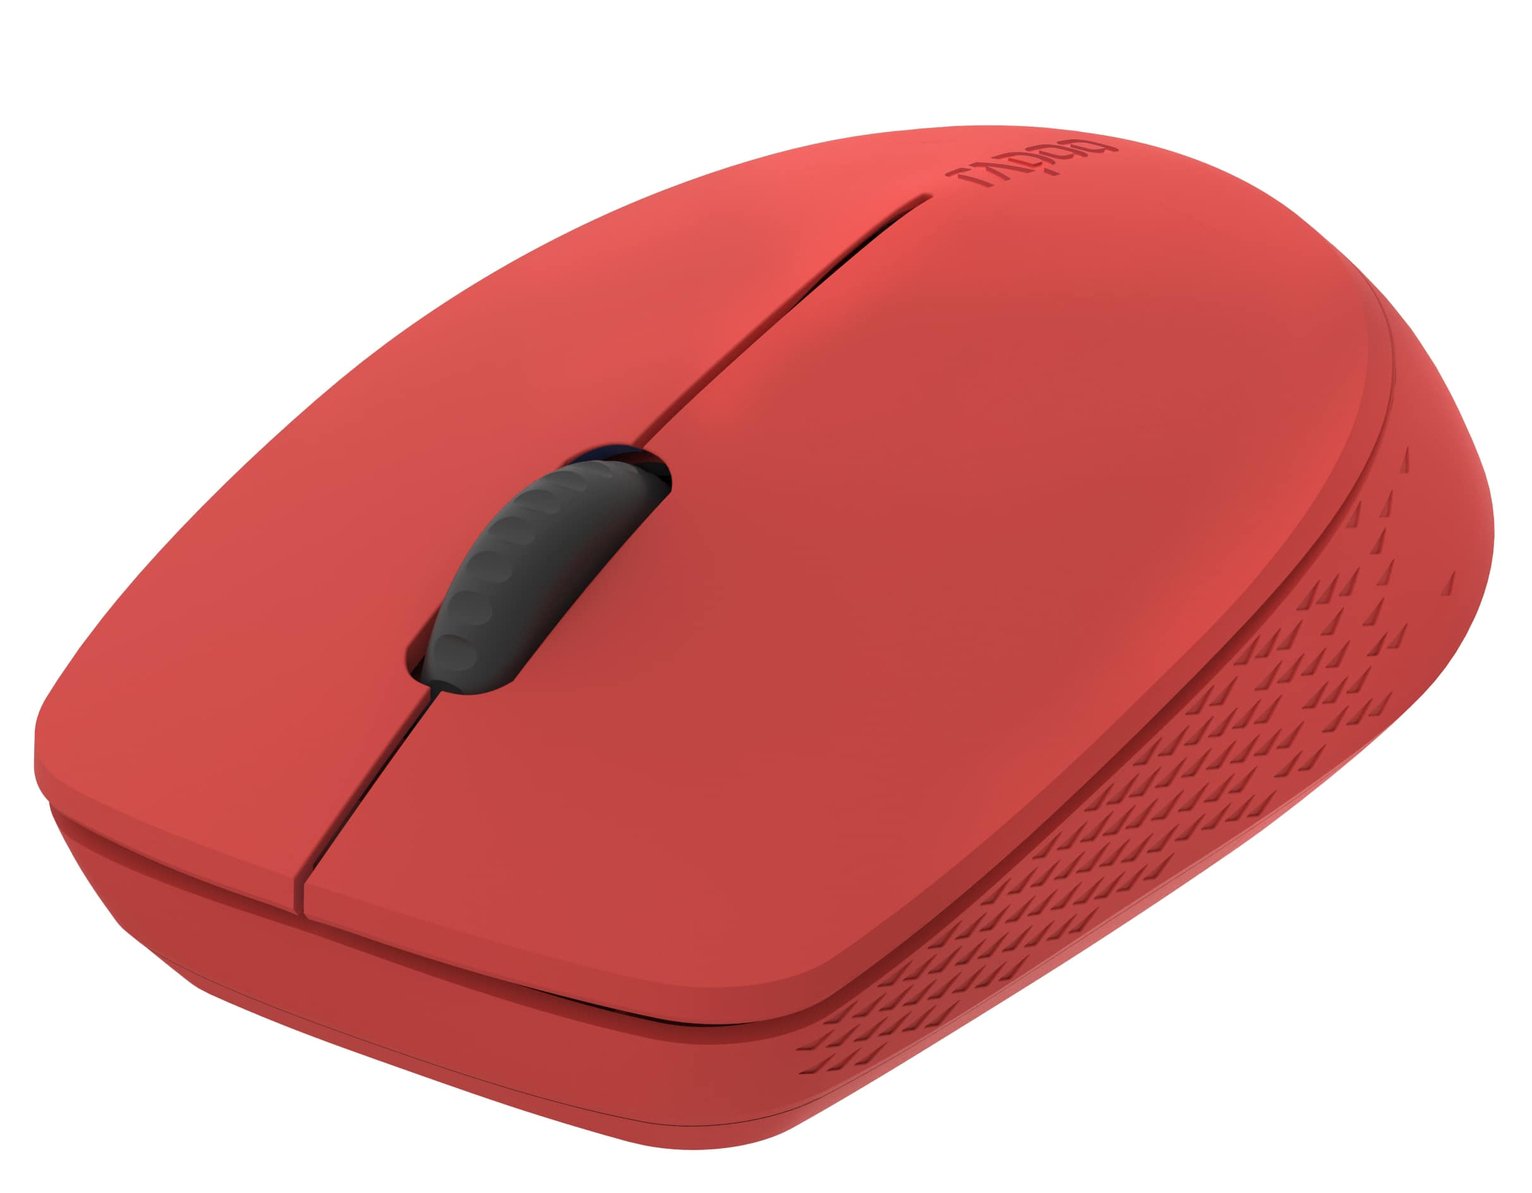 Rapoo M100 Silent Multi-Mode Wireless Mouse Review